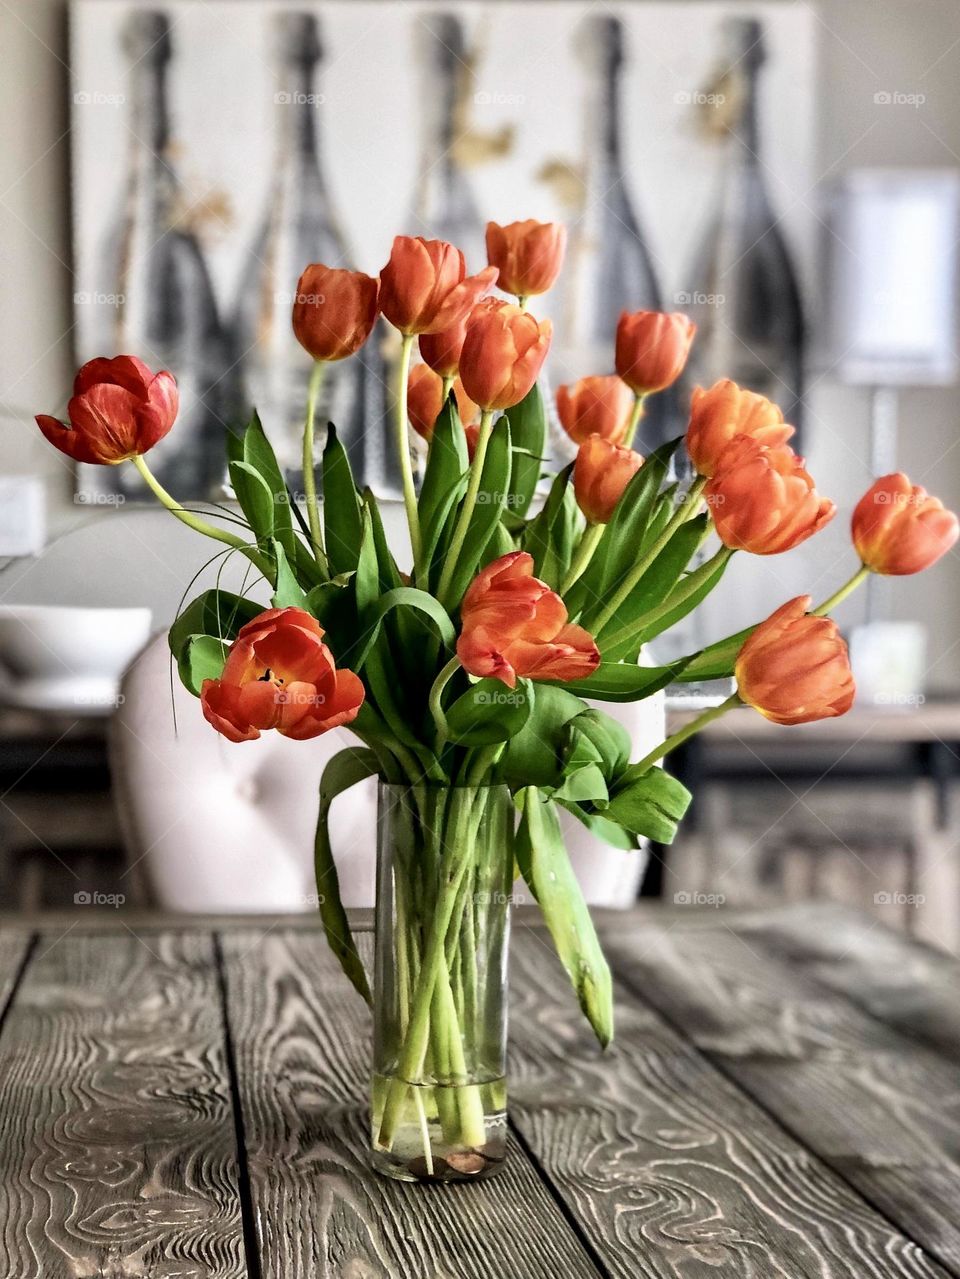 Foap Mission Flowers In A Vase! Unique Orange Tulips In A Vase With Champagne Bottles!